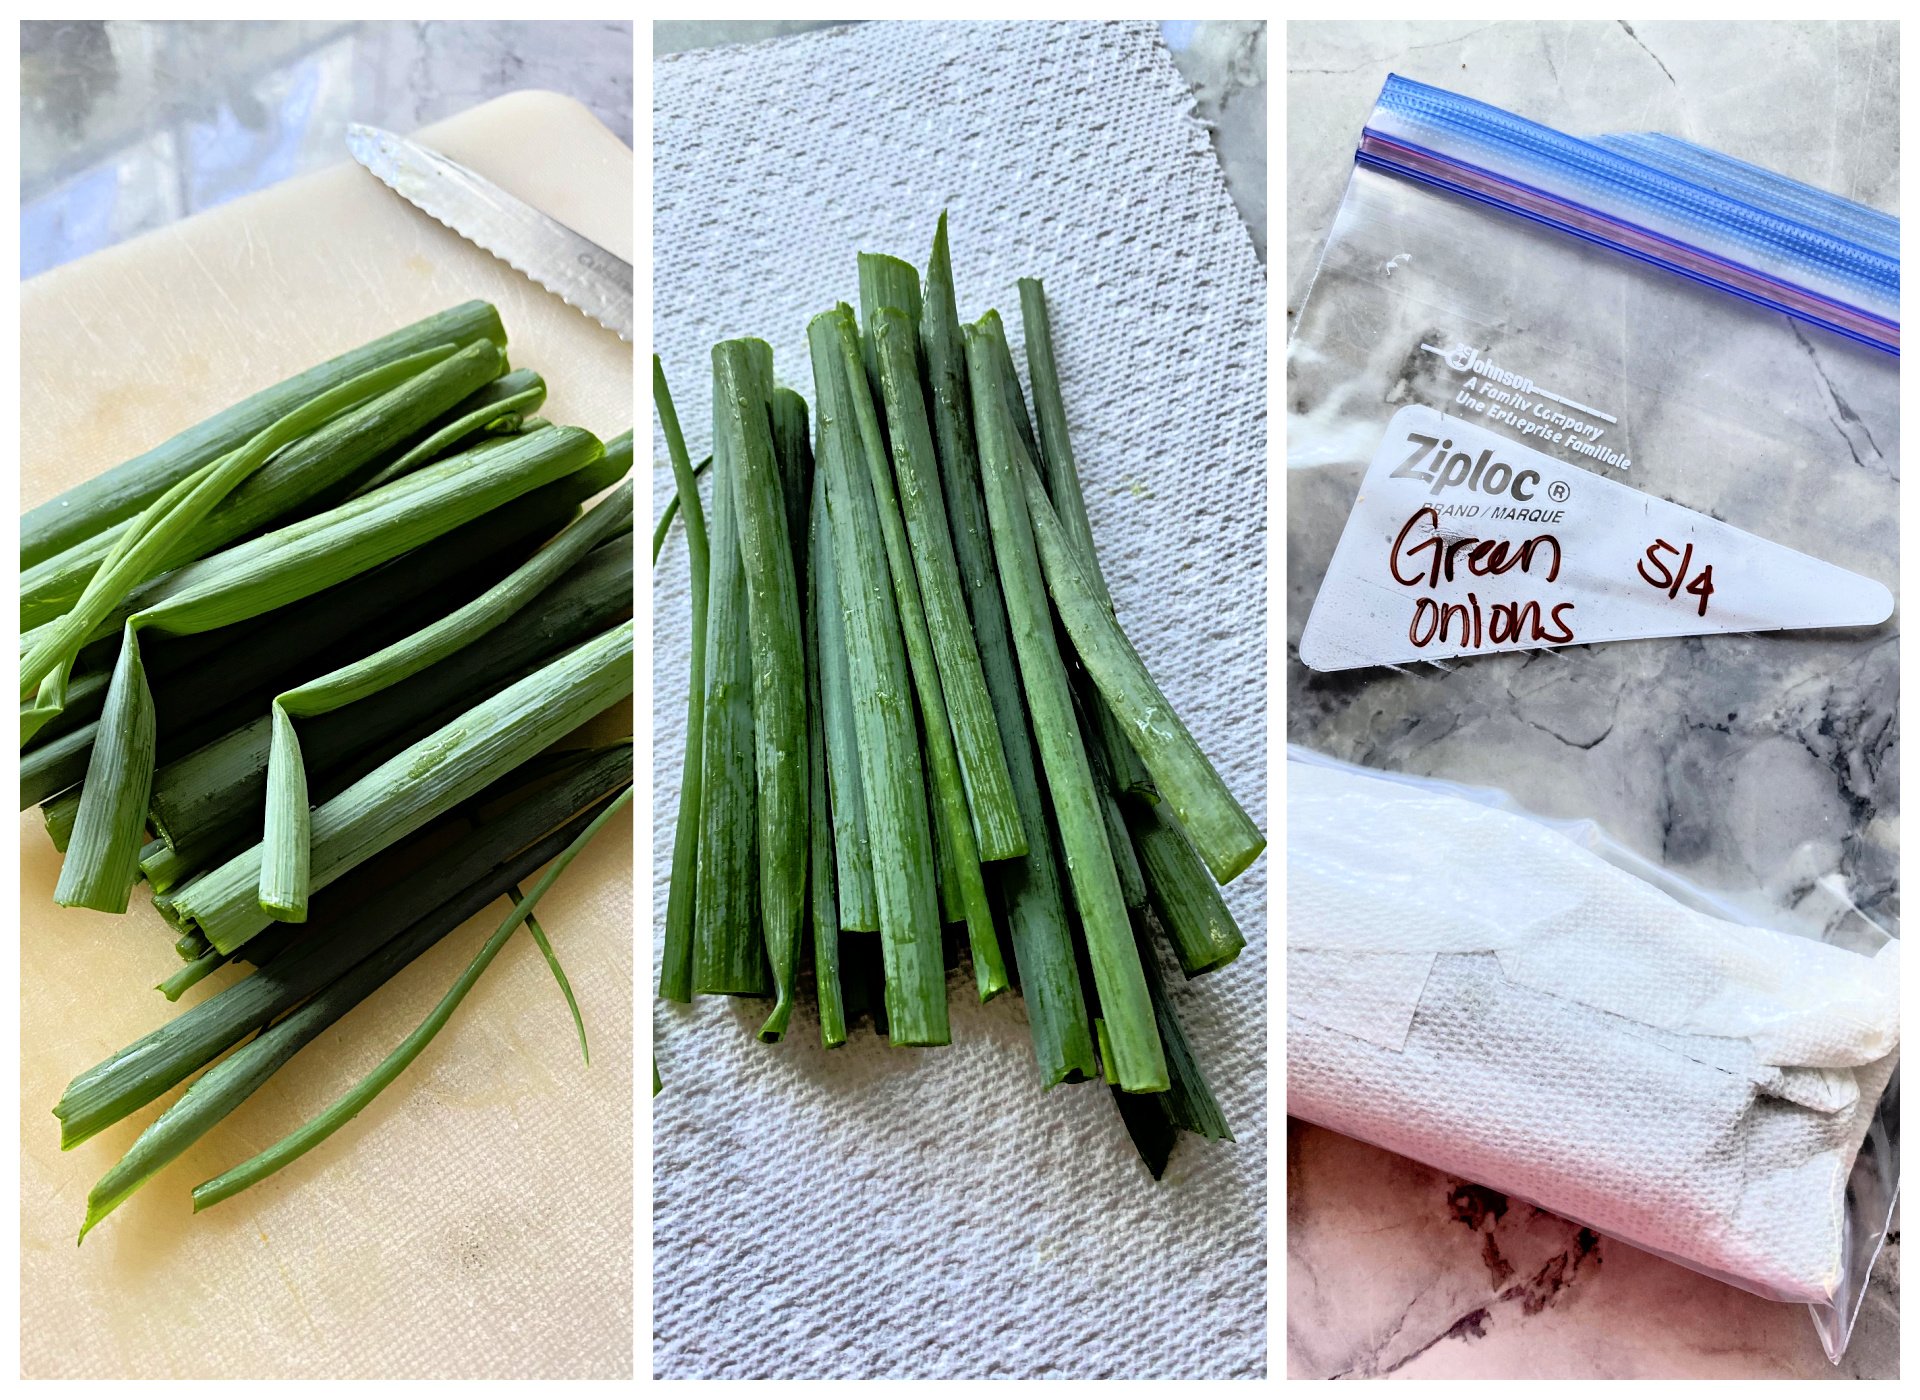 Three images showing how to store fresh green onions.